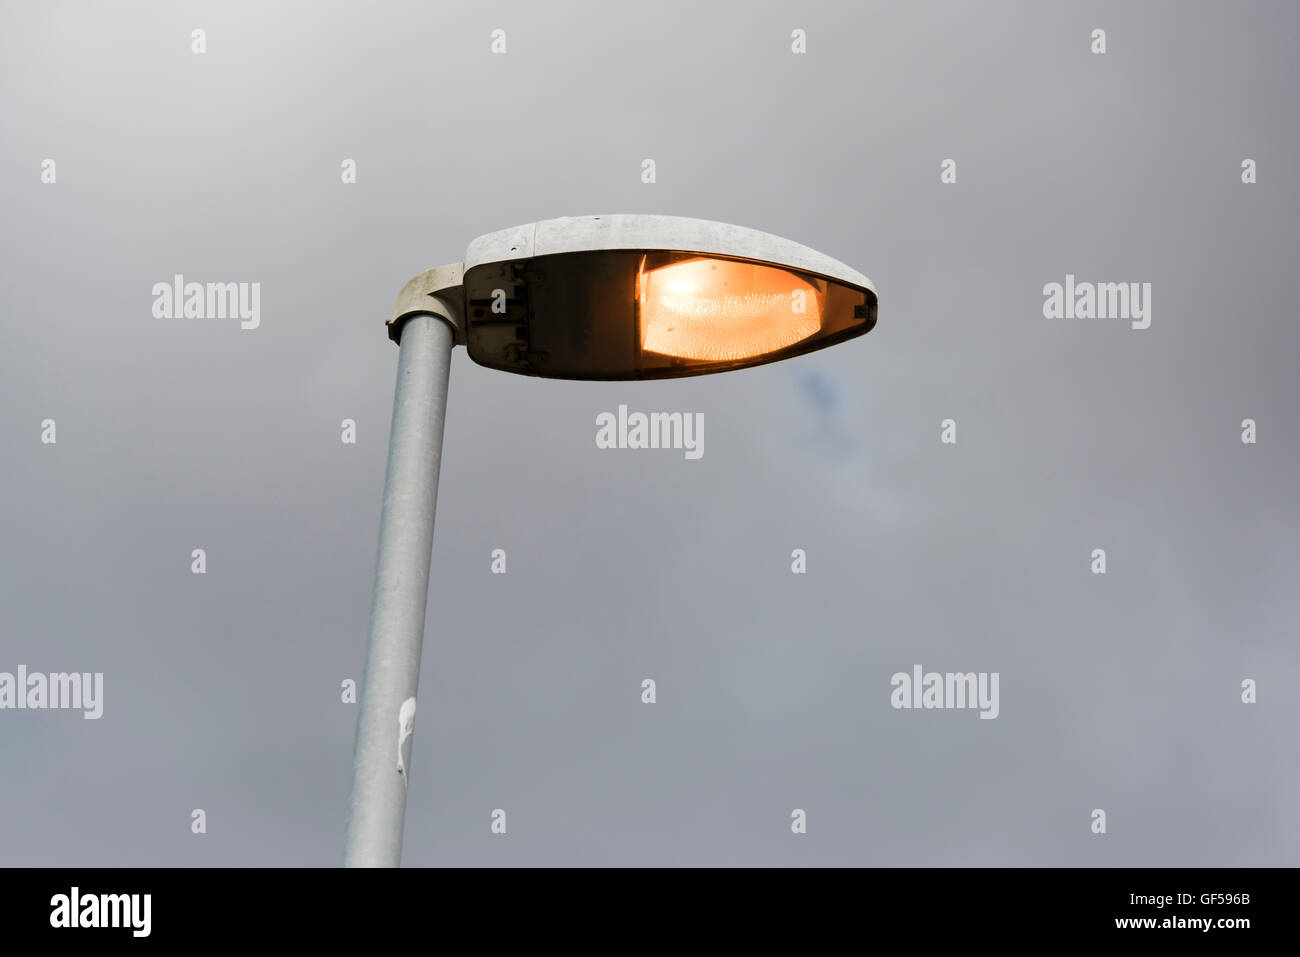 A street lamp close up, turned on in the daytime against a grey sky Stock Photo